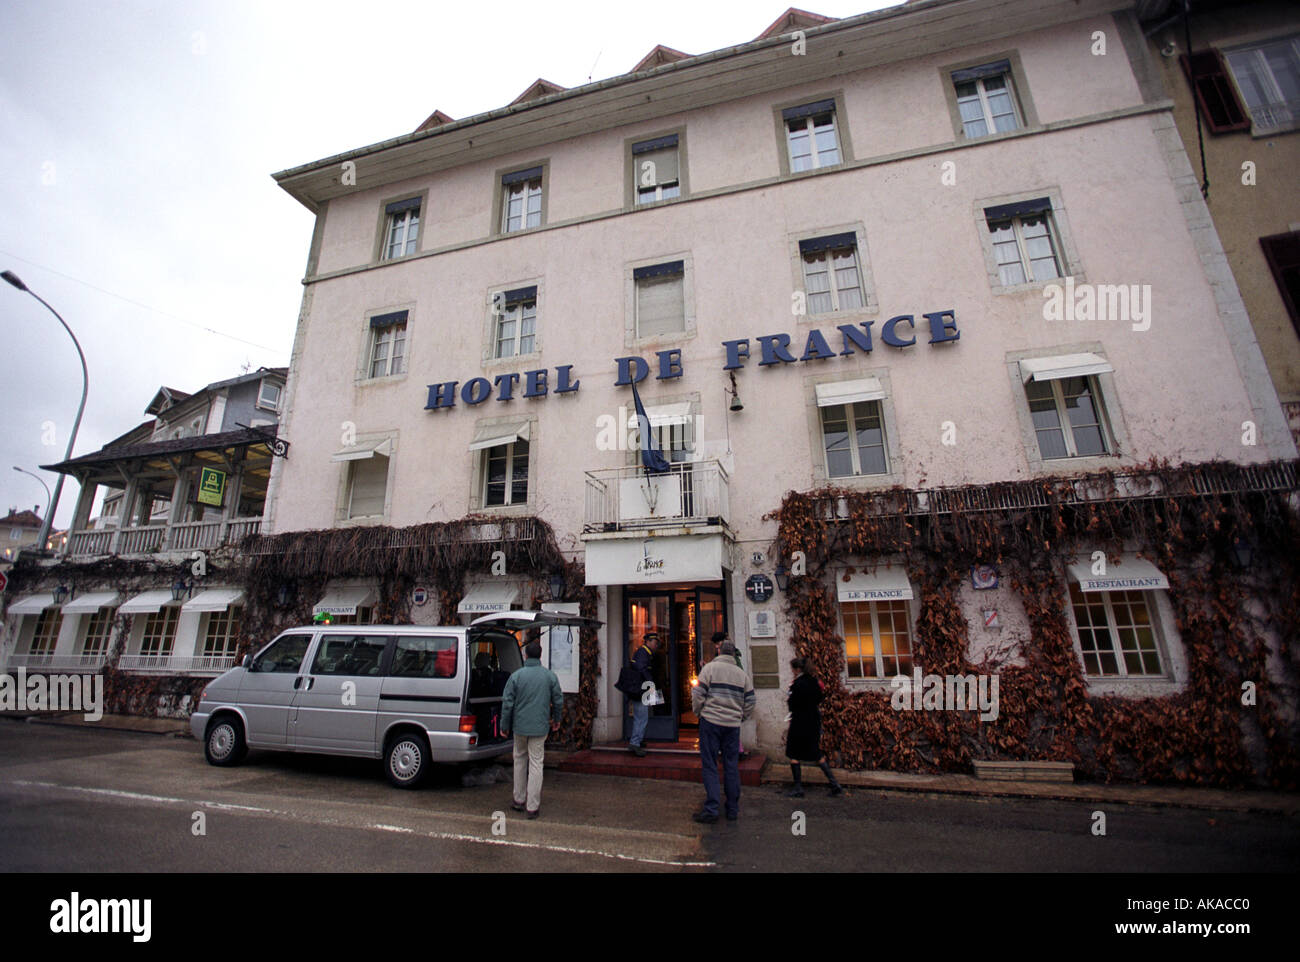 Hotel de France in Villers Le Lac in the French Comte region of France Stock Photo